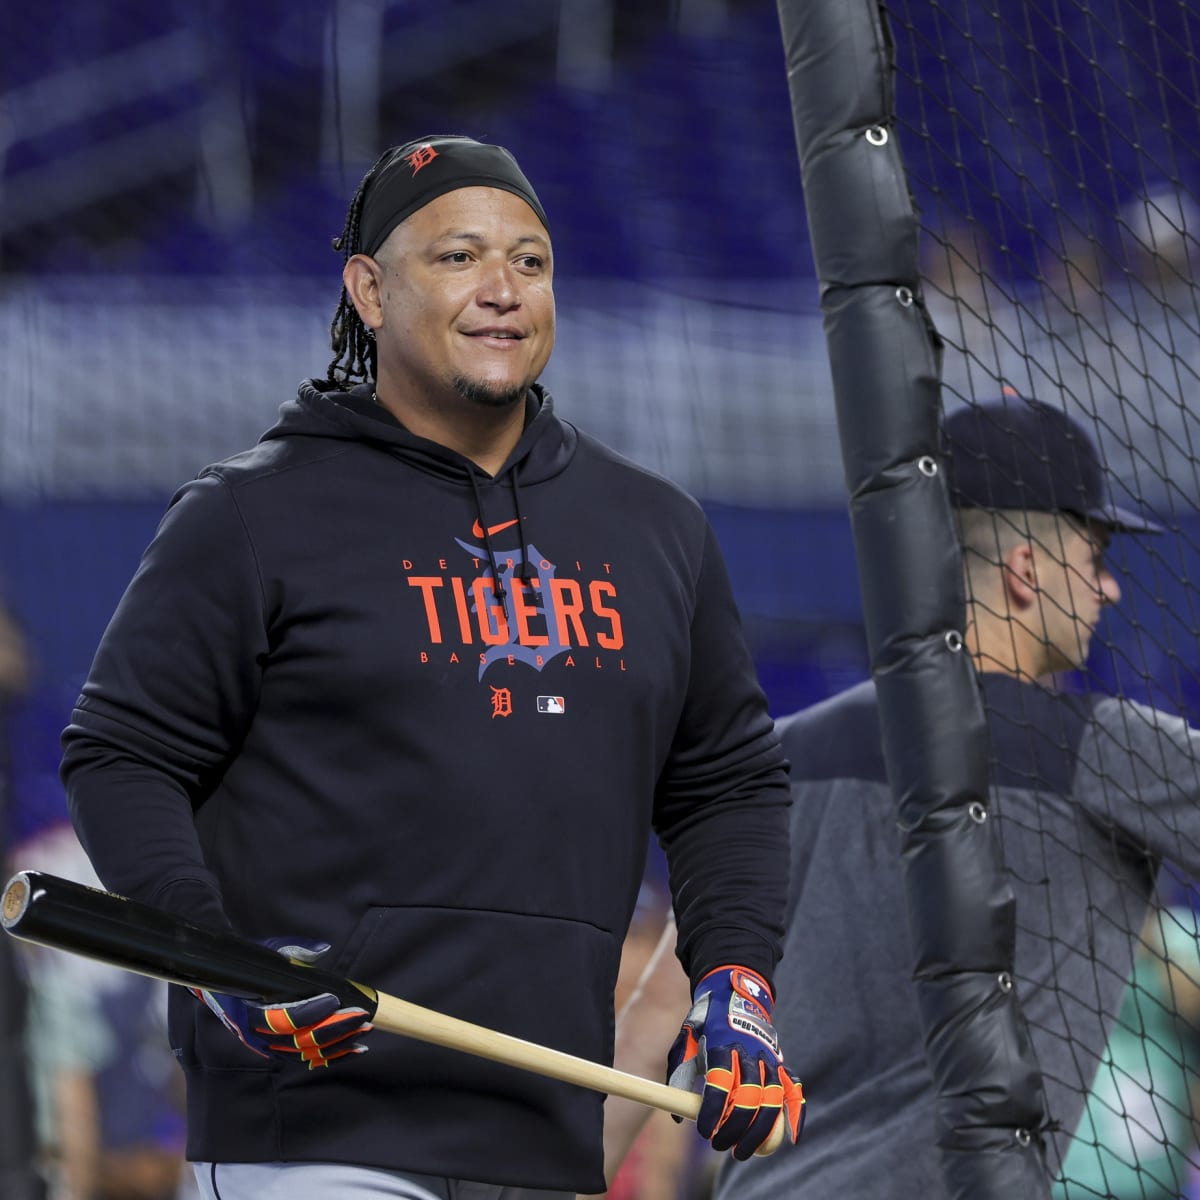 Young Miguel Cabrera brought so much joy to Marlins baseball - Fish Stripes